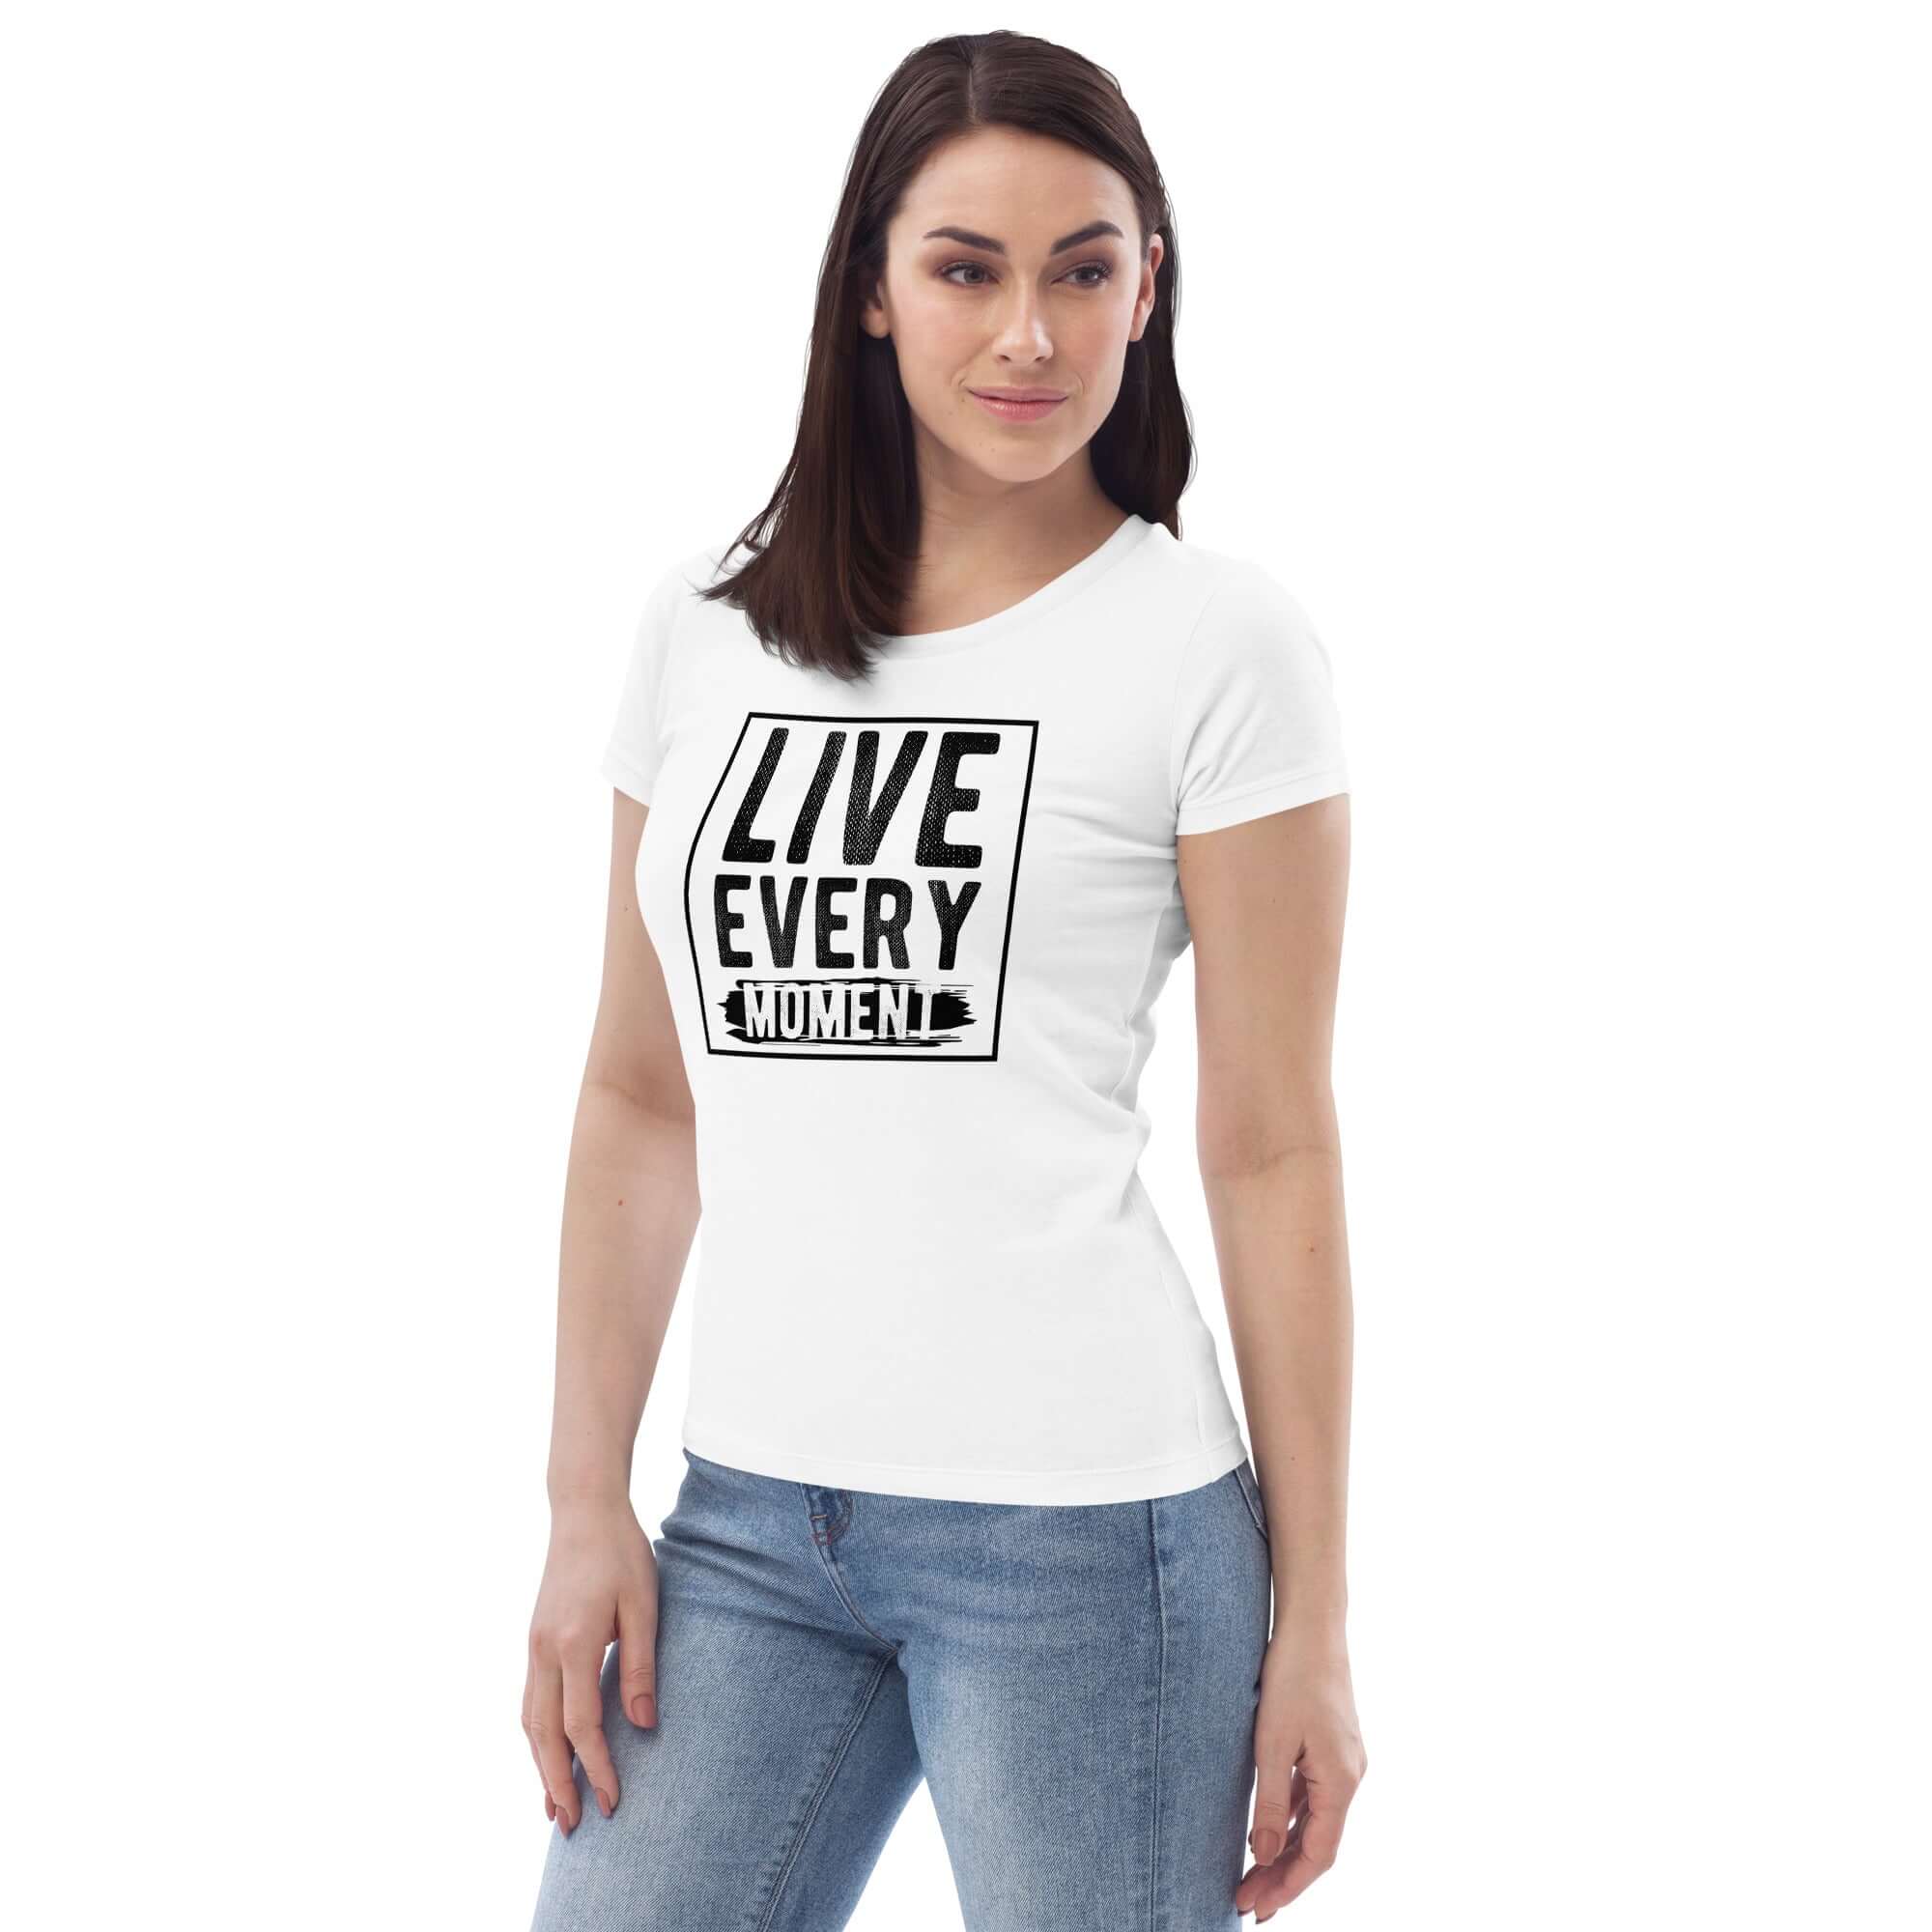 Organic Fitted Tee Live Every Moment - Revive Wear     Shop Organic Fitted Tee Live Every Moment $54.00 Browse Women's Sportswear and Activewear at Revive Wear Australia. Subscribe and receive your first 15% Discount. 